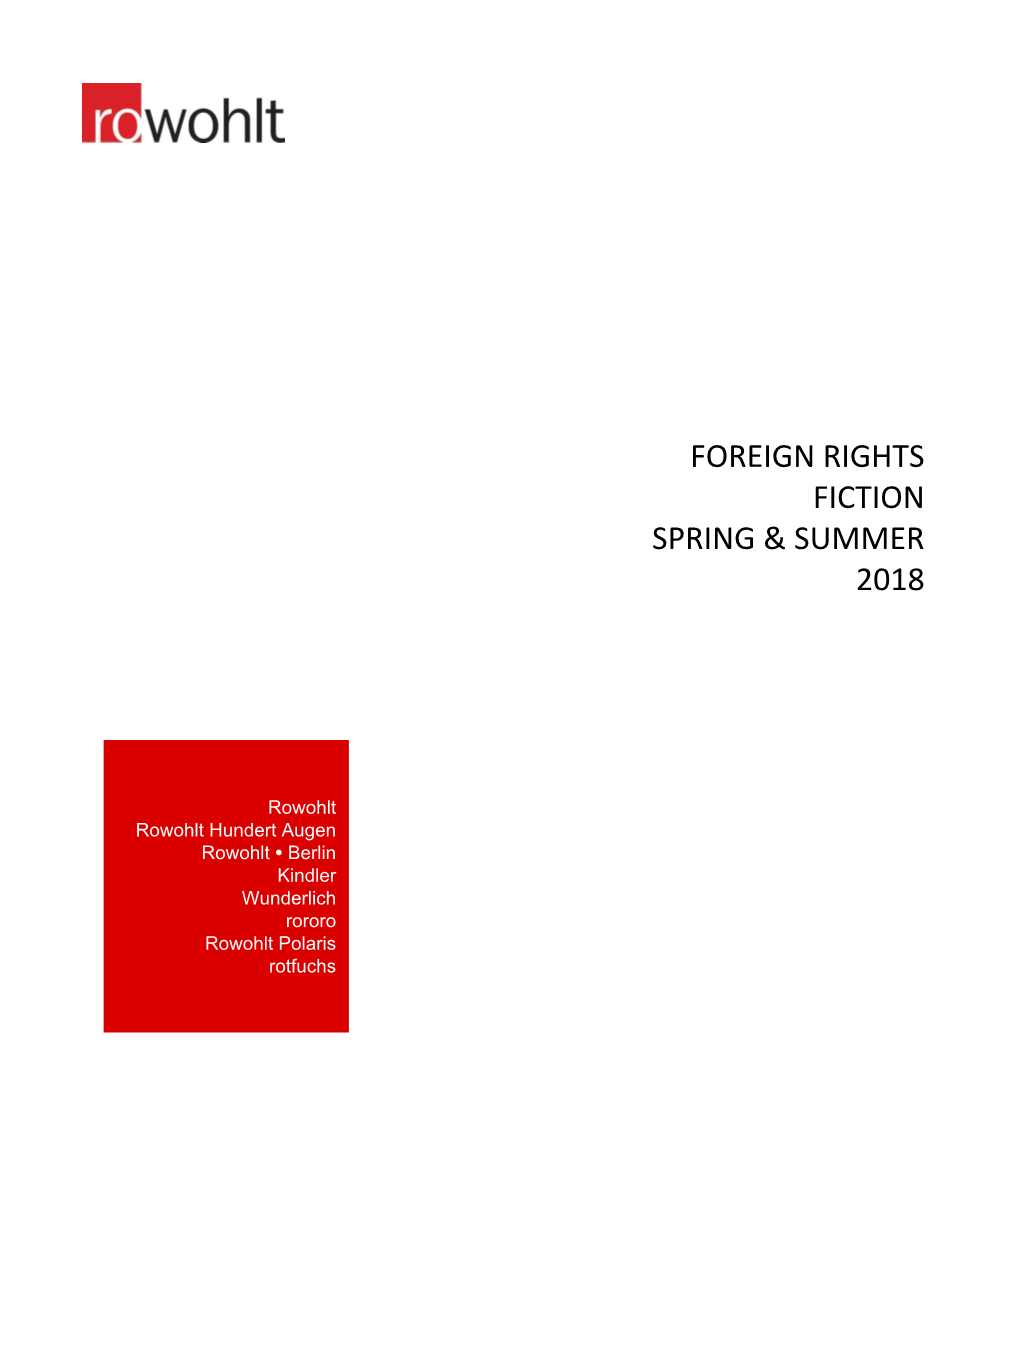 Foreign Rights Fiction Spring & Summer 2018